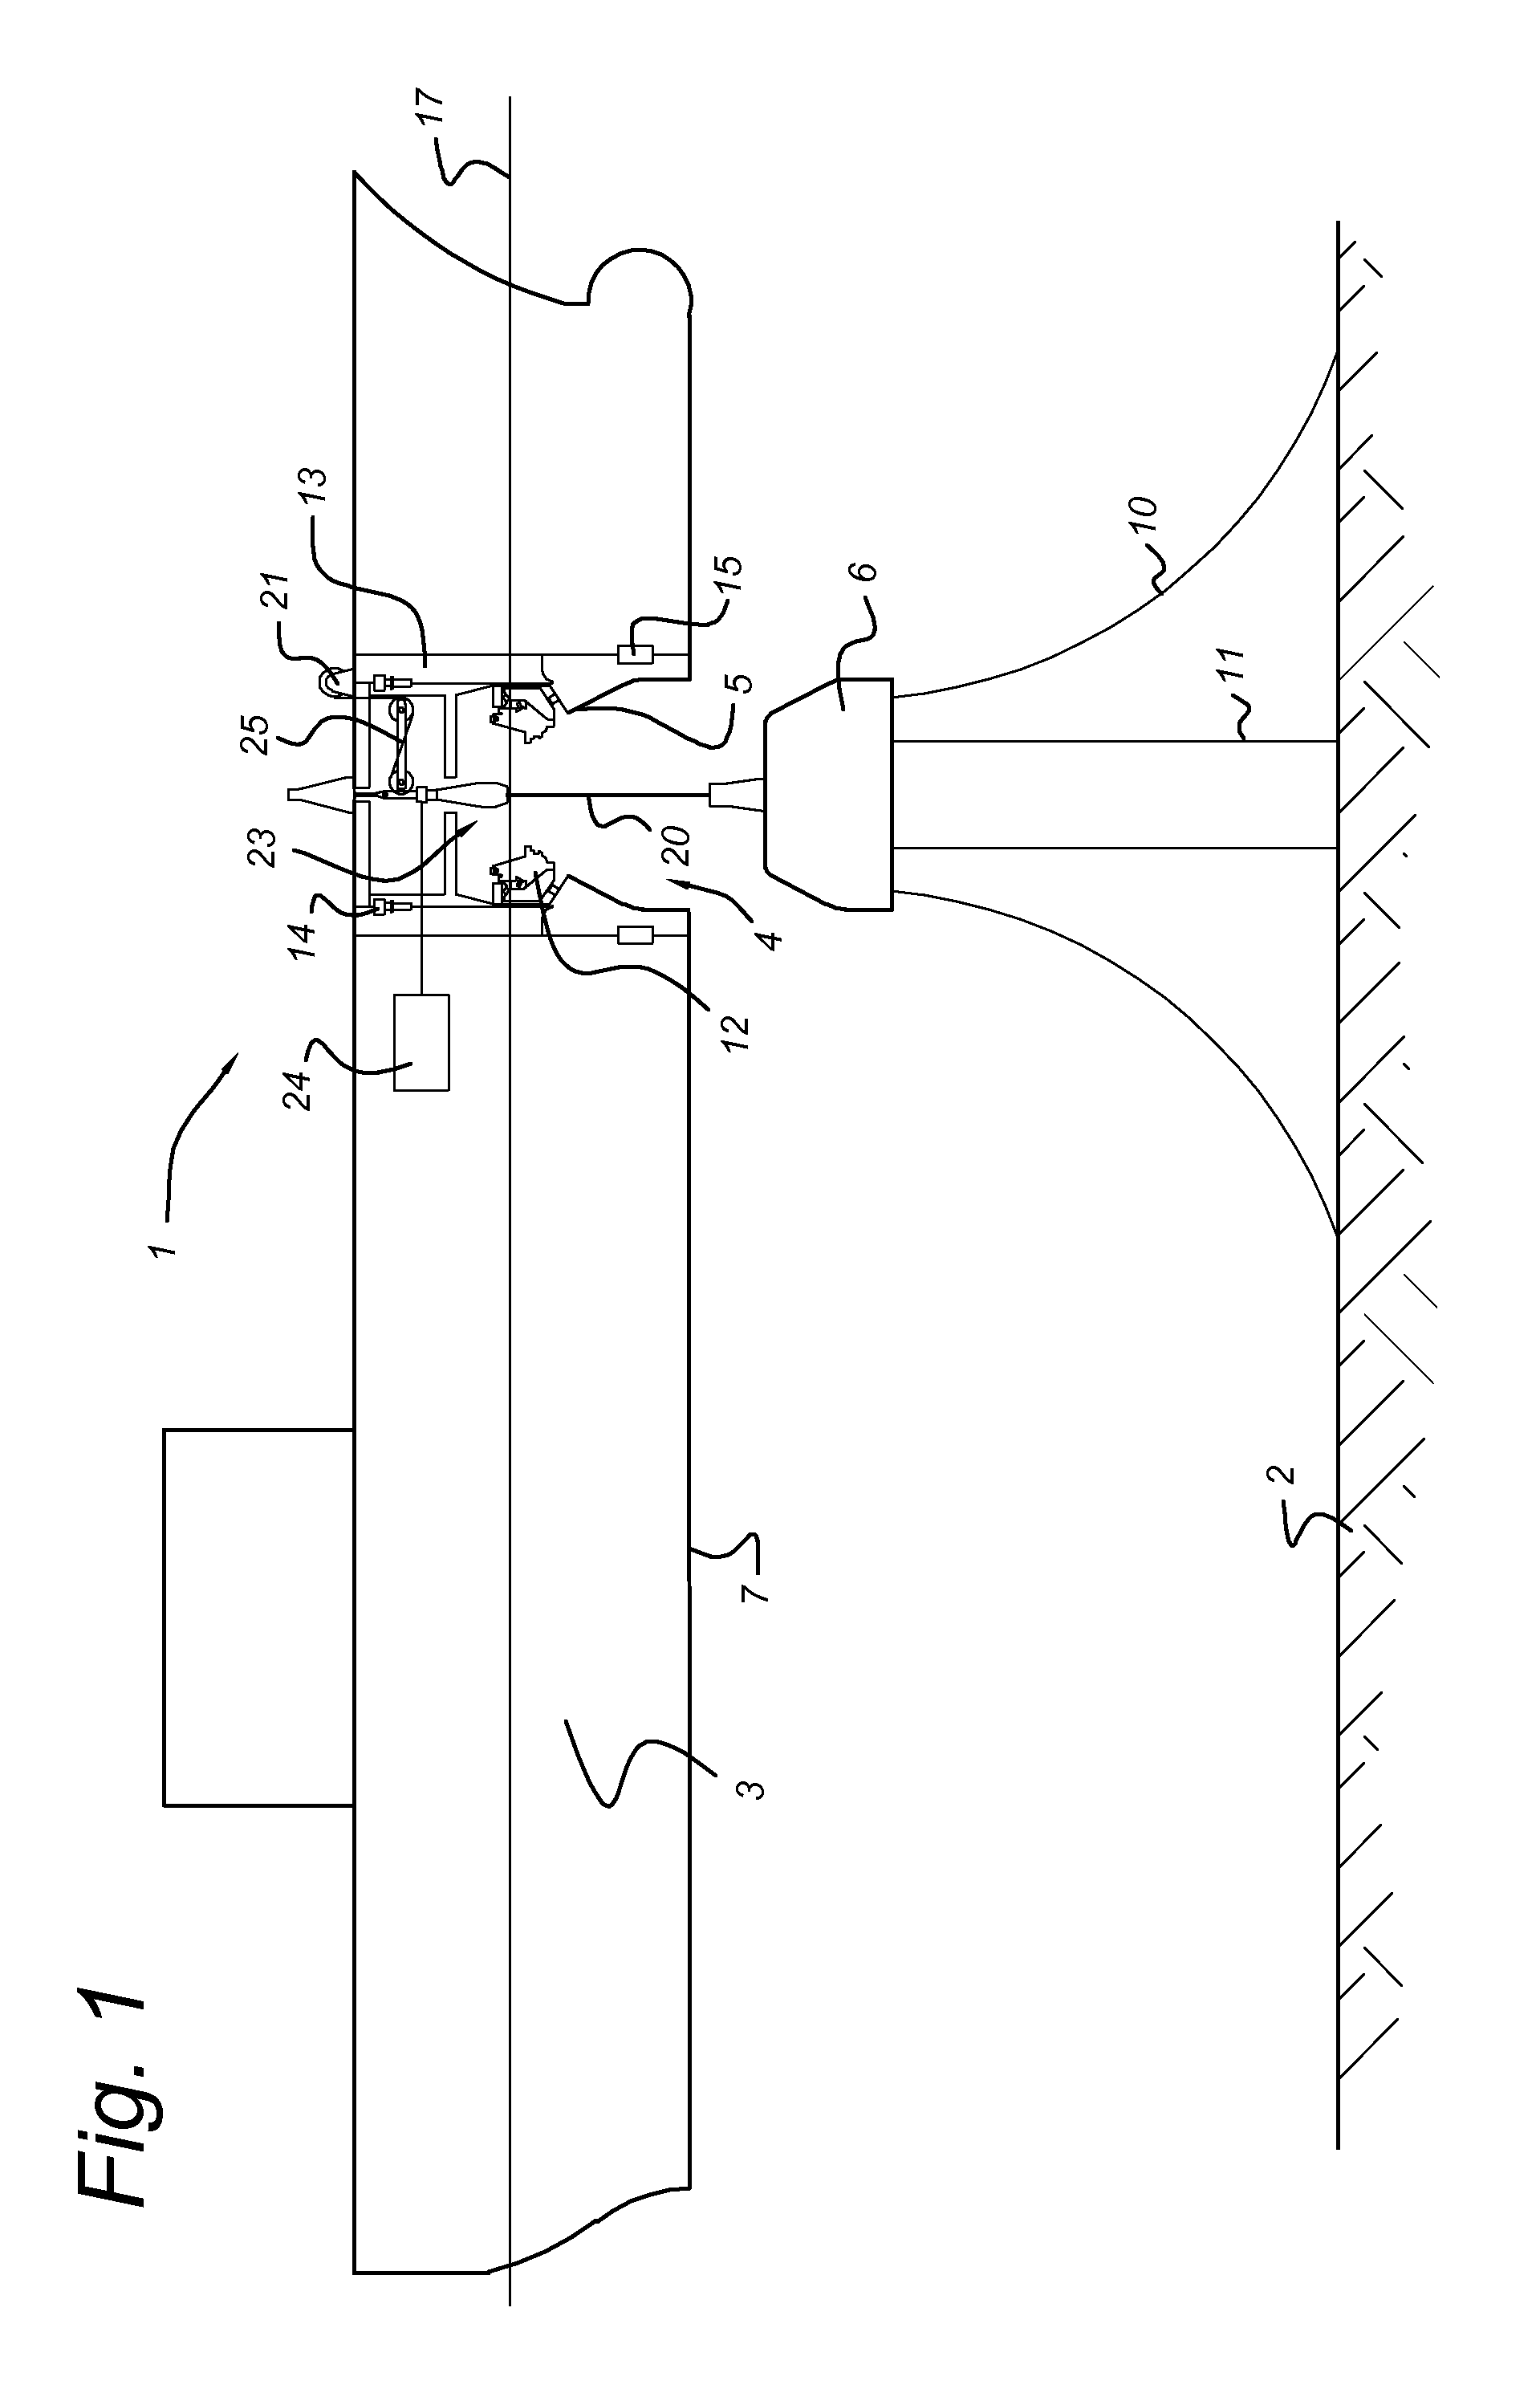 Vessel comprising a mooring connector with a heave compensator